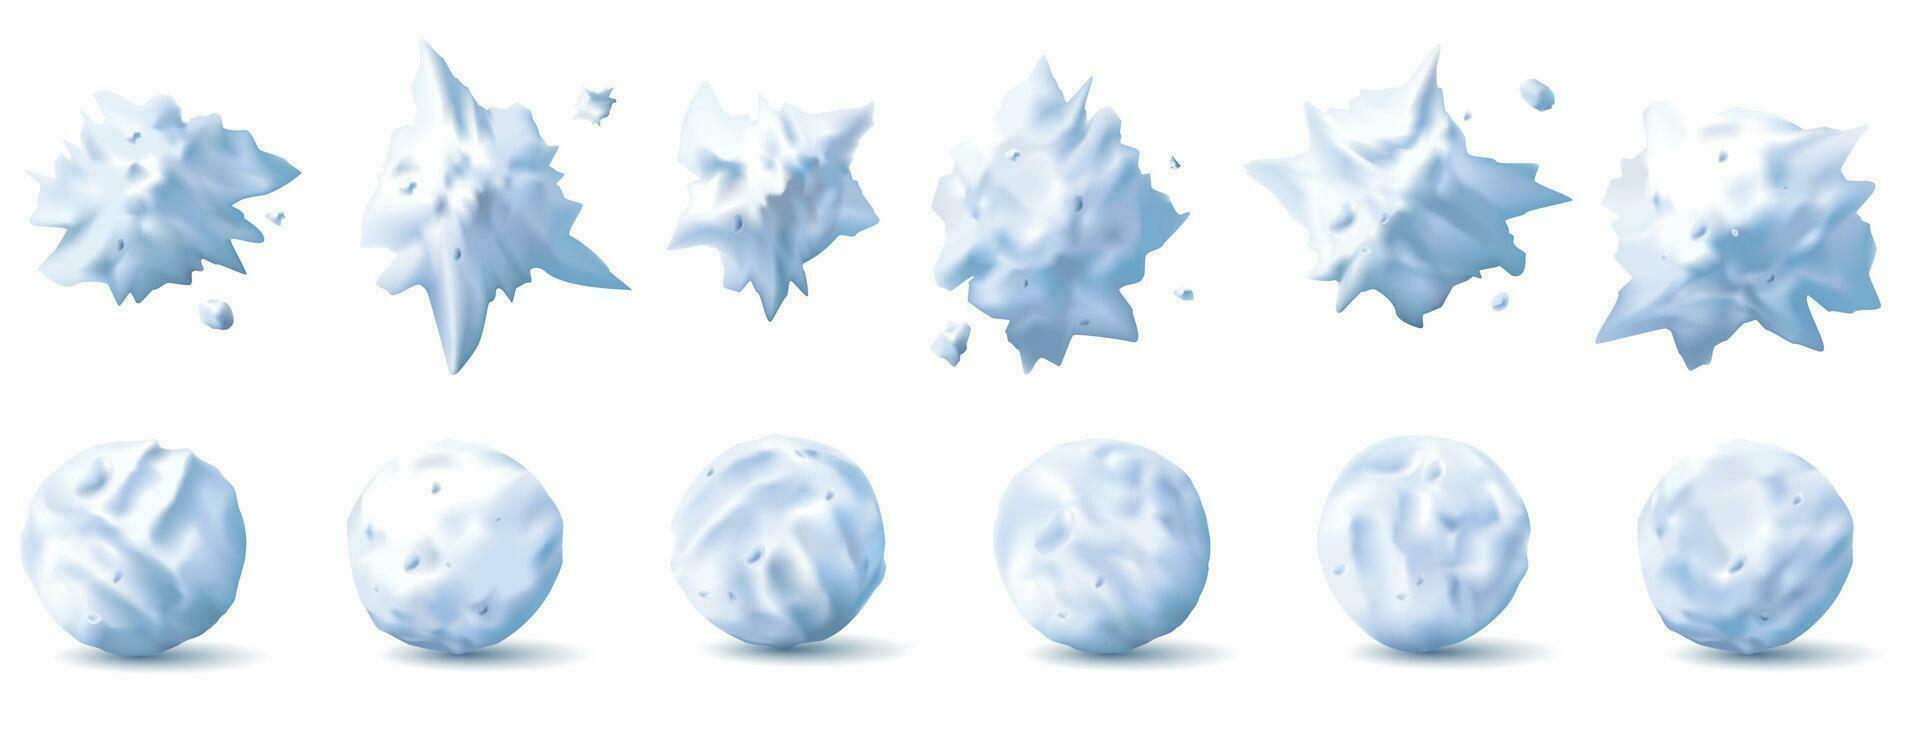 Snowball 3d. Snow splats, splashes and round white snowballs collection for kids winter fights realistic vector set